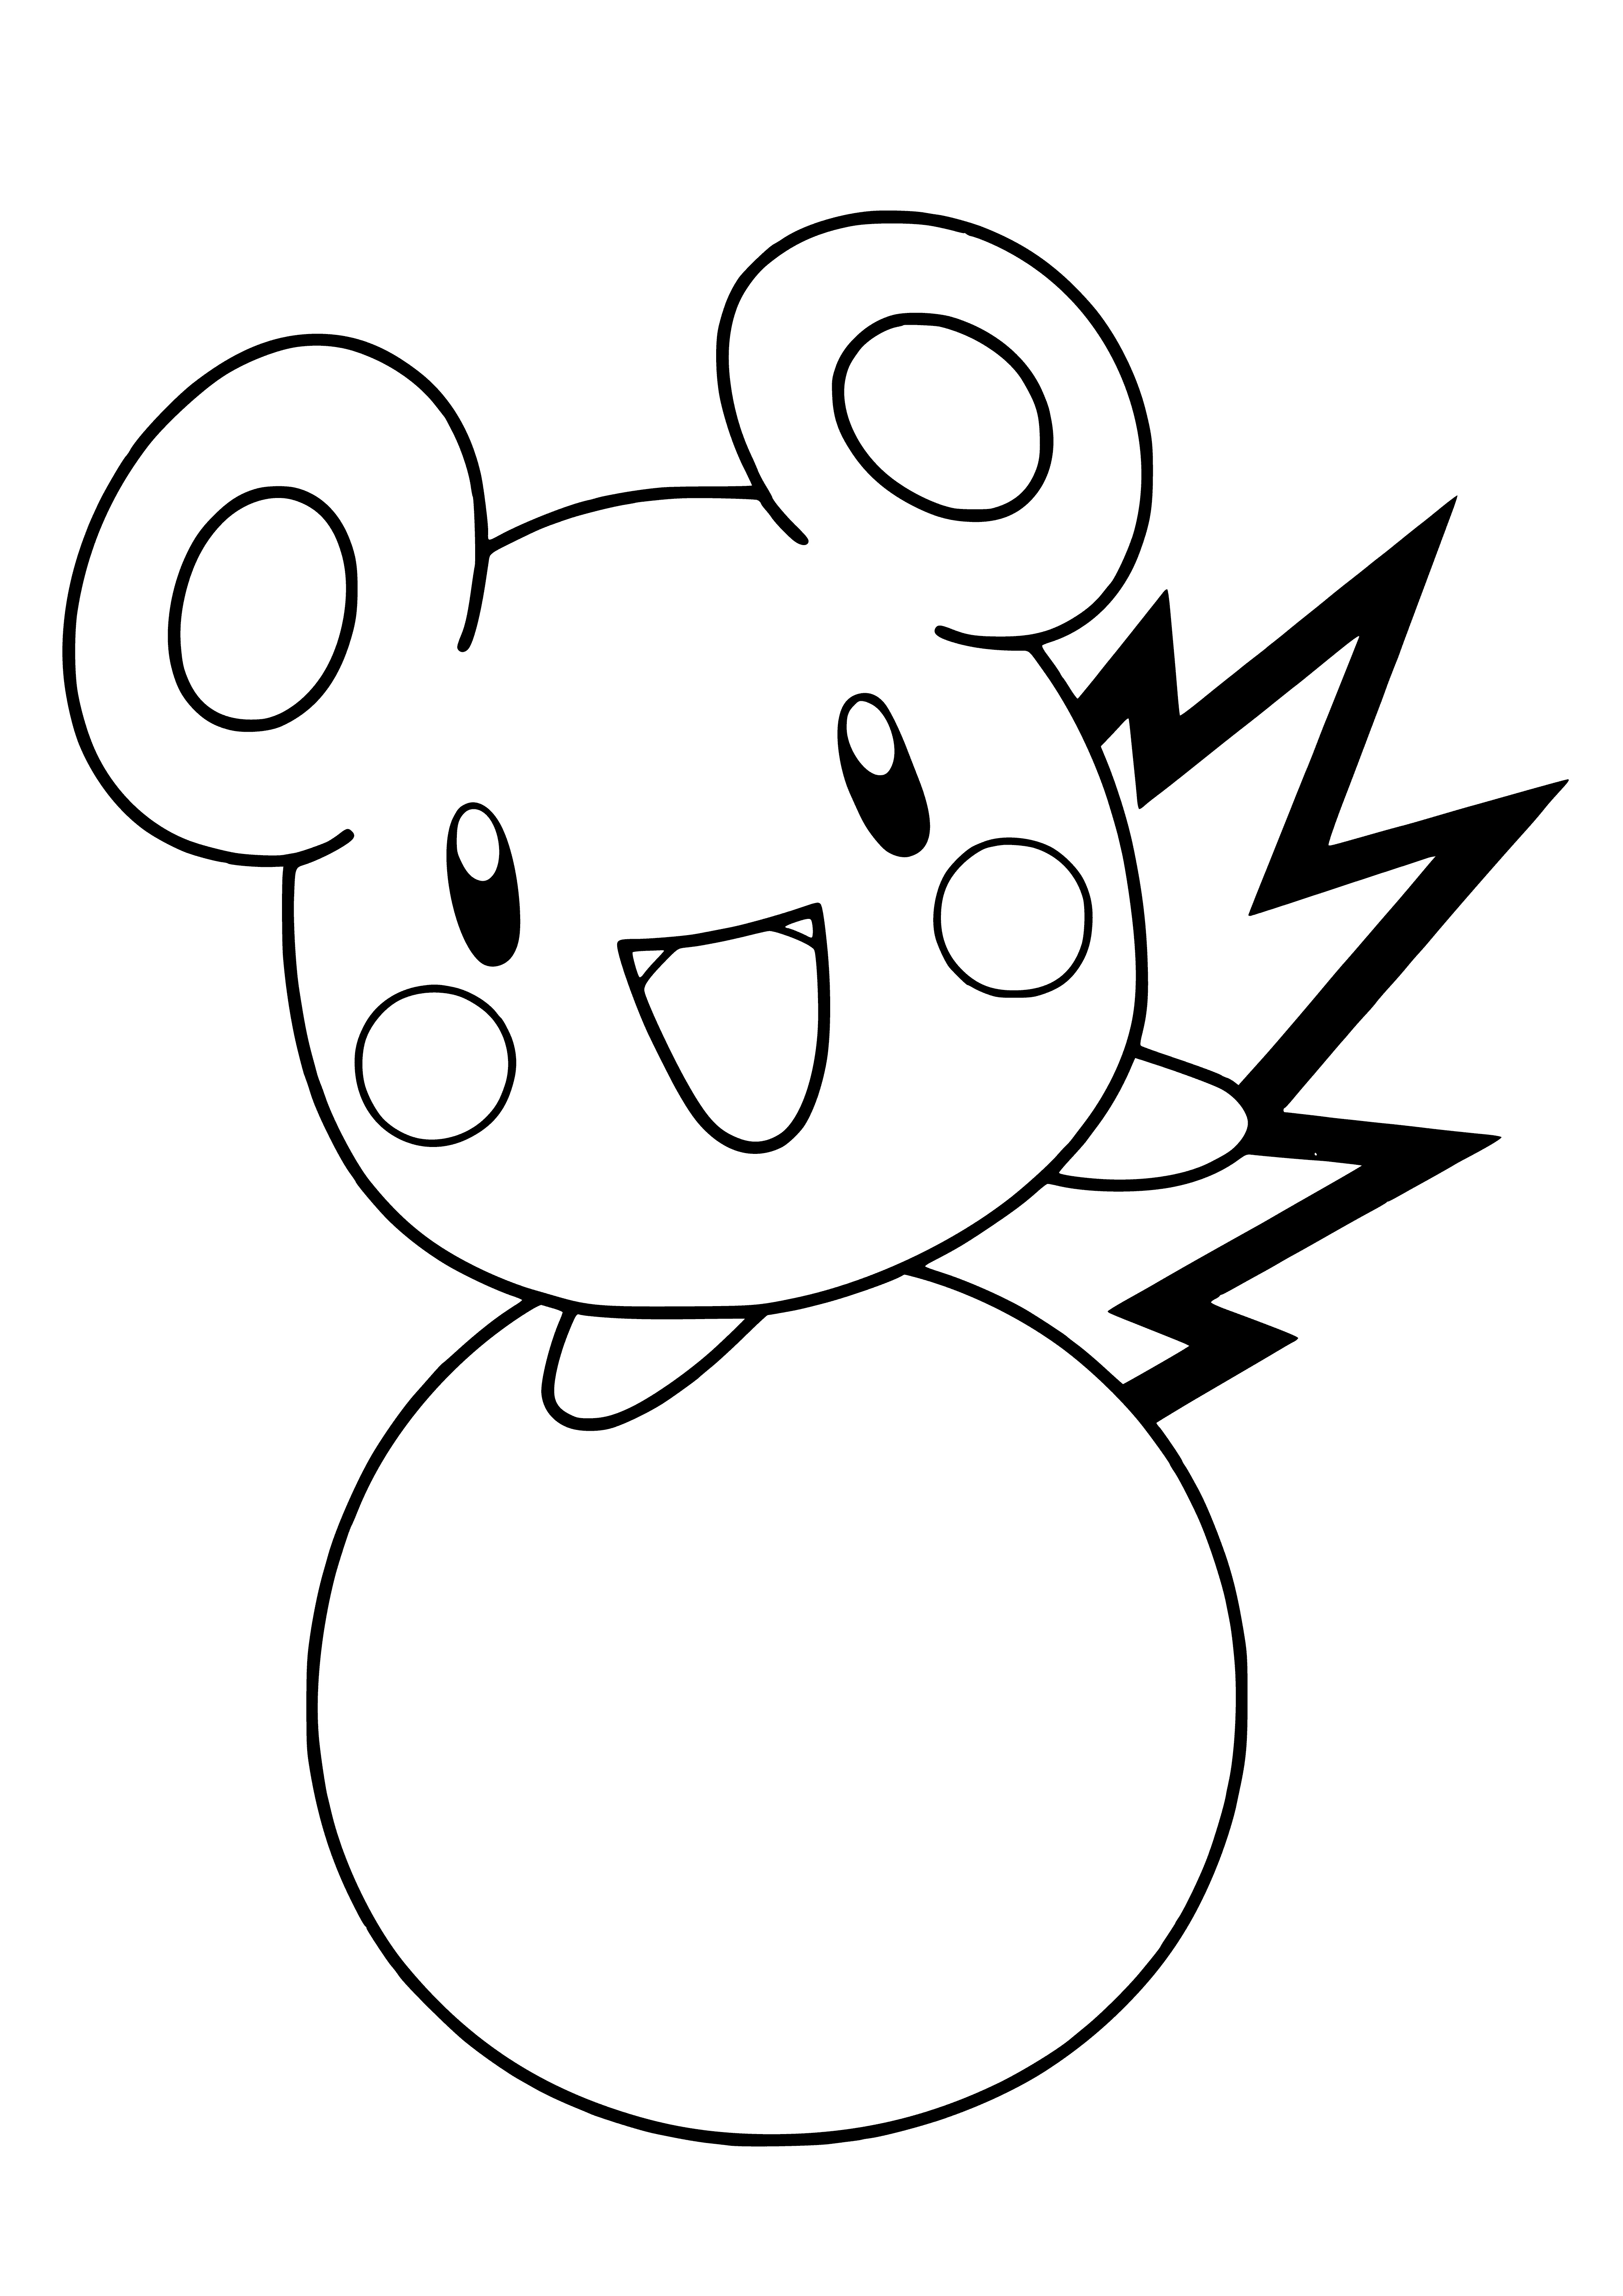 Pokemon Azuril (Azurill) coloring page